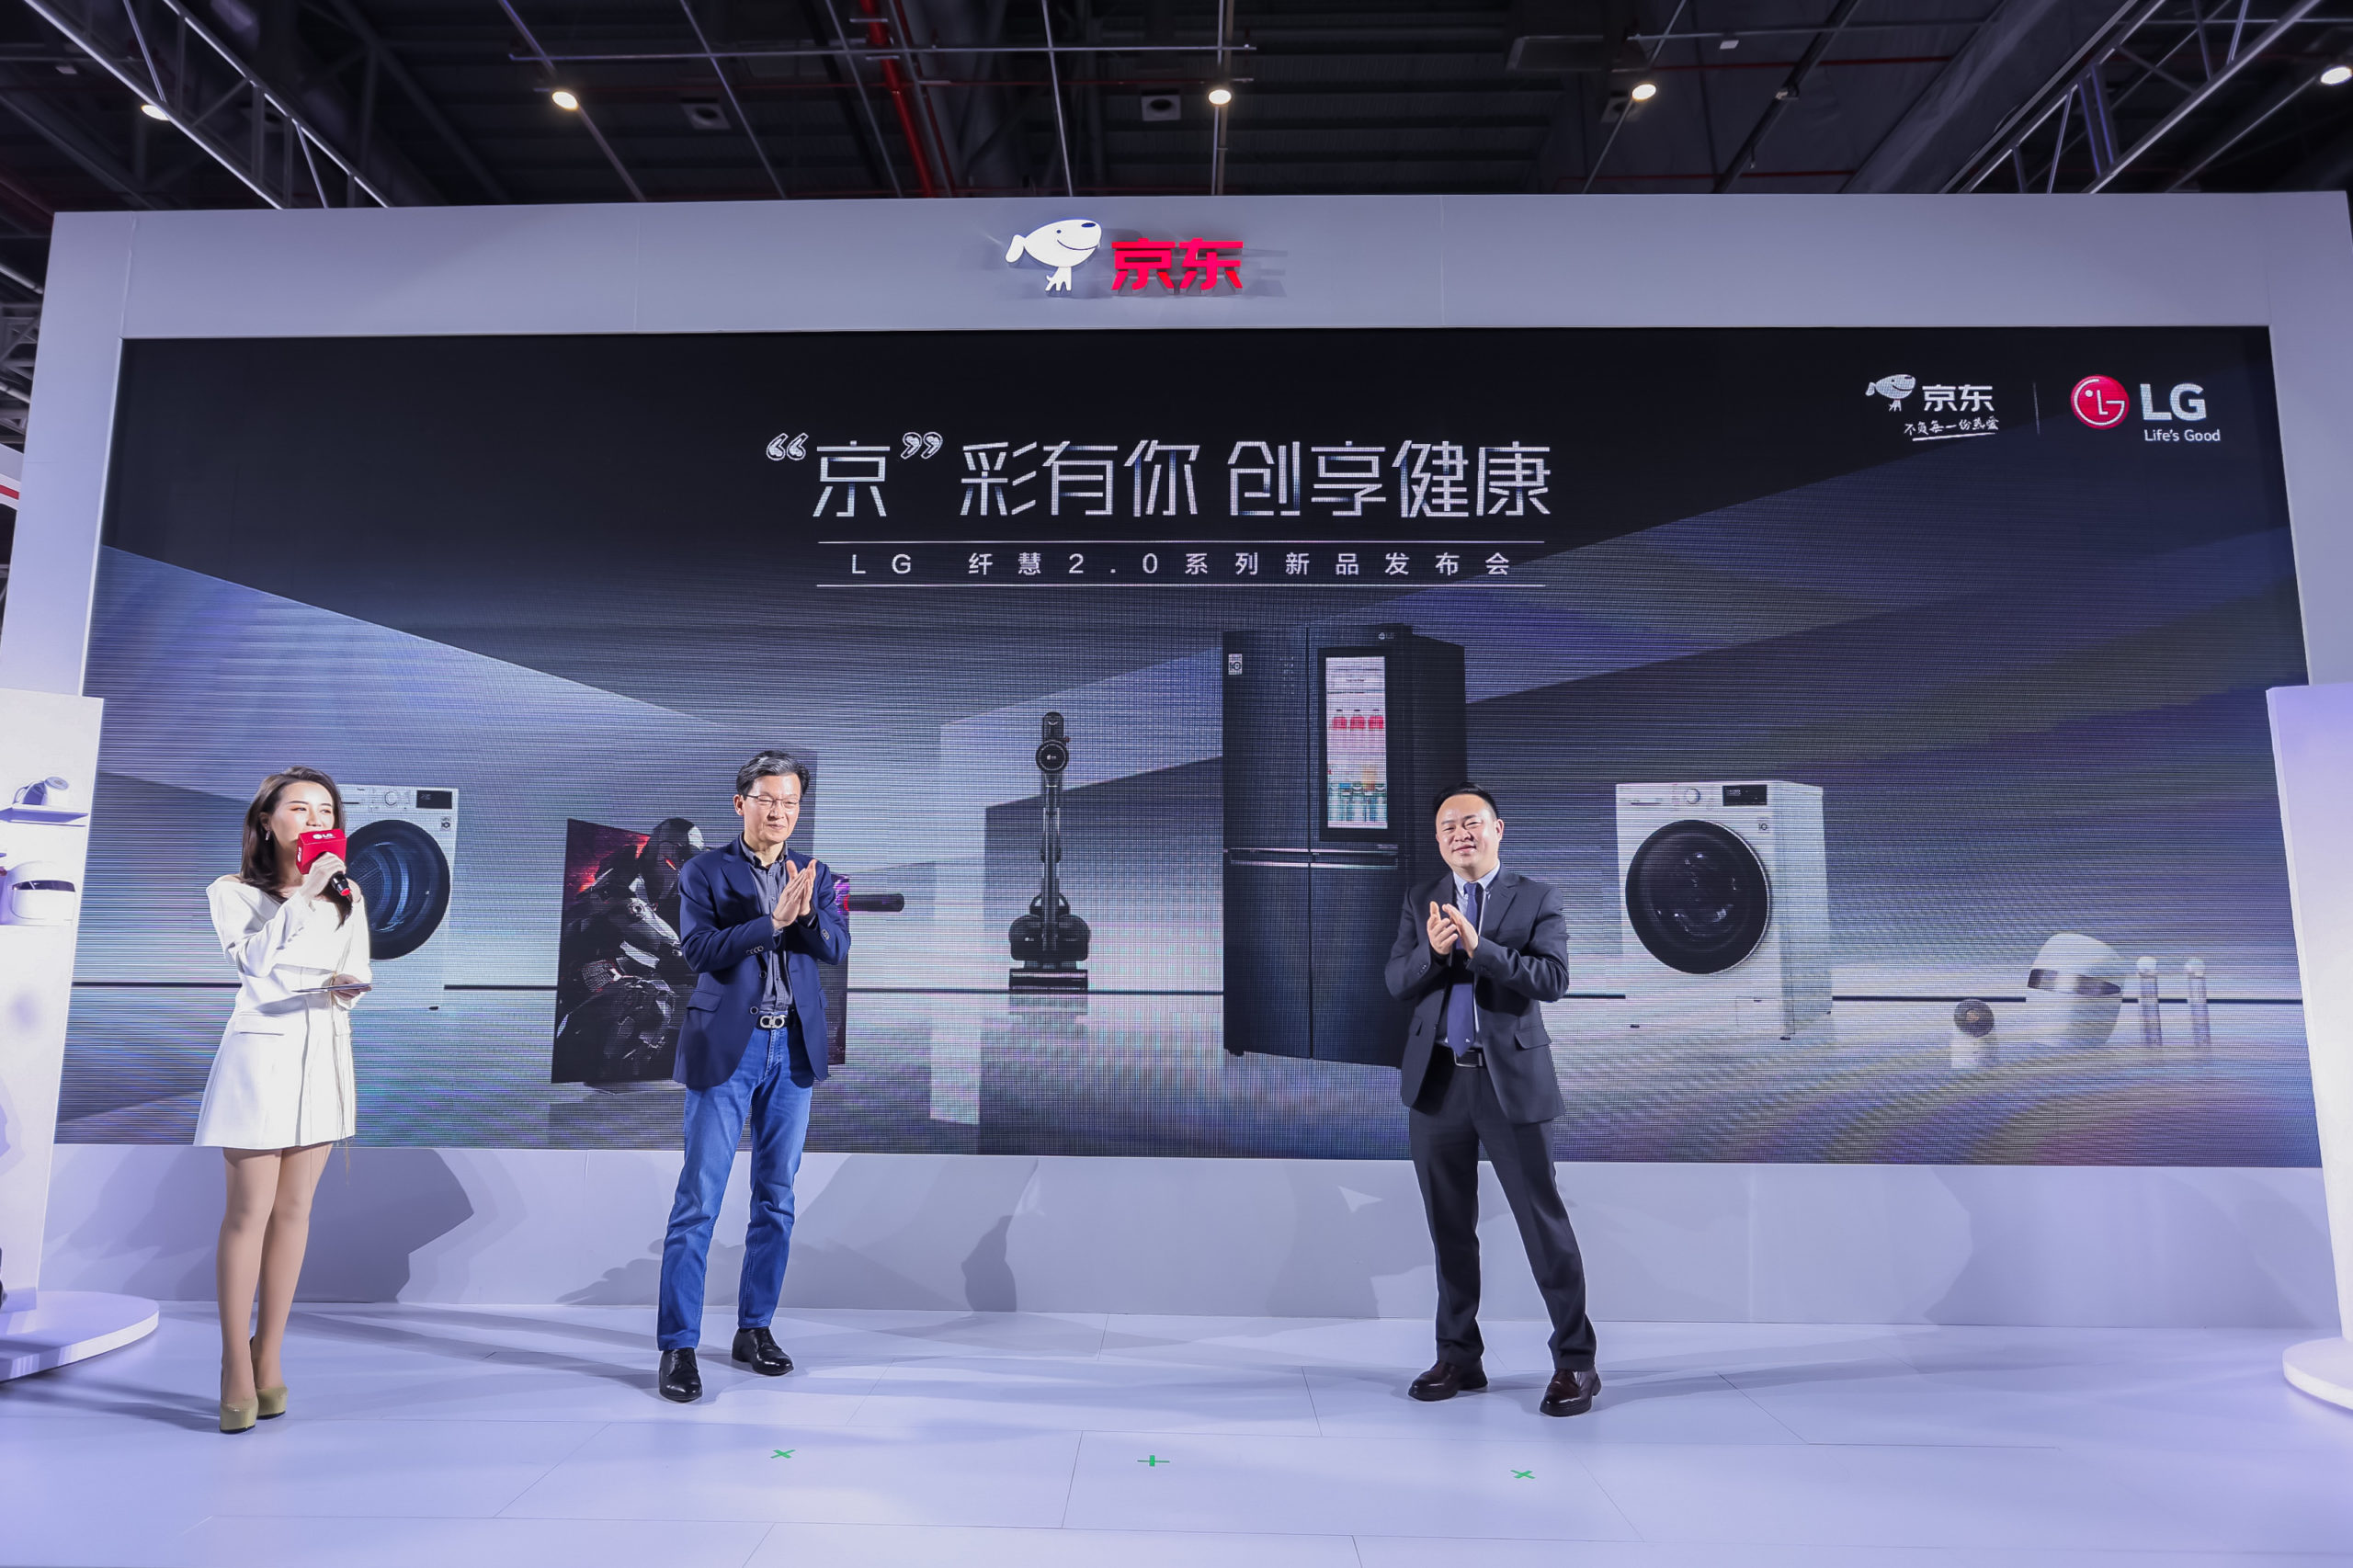 JD and LG announced that they will deepen their cooperation on C2M products,